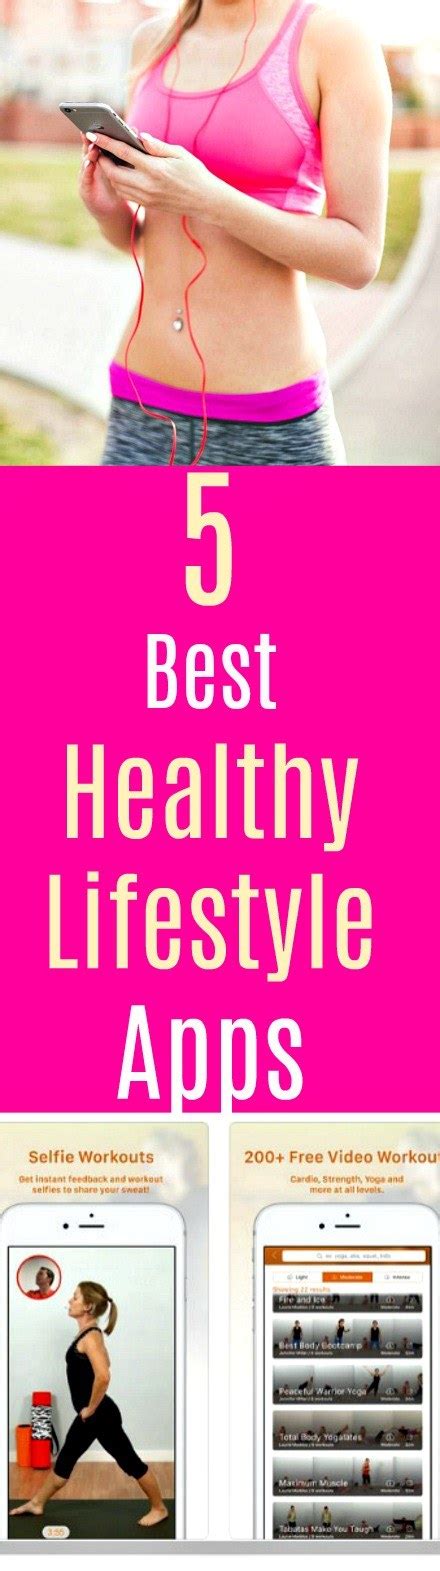 Apps 5 Best Healthy Lifestyle Apps